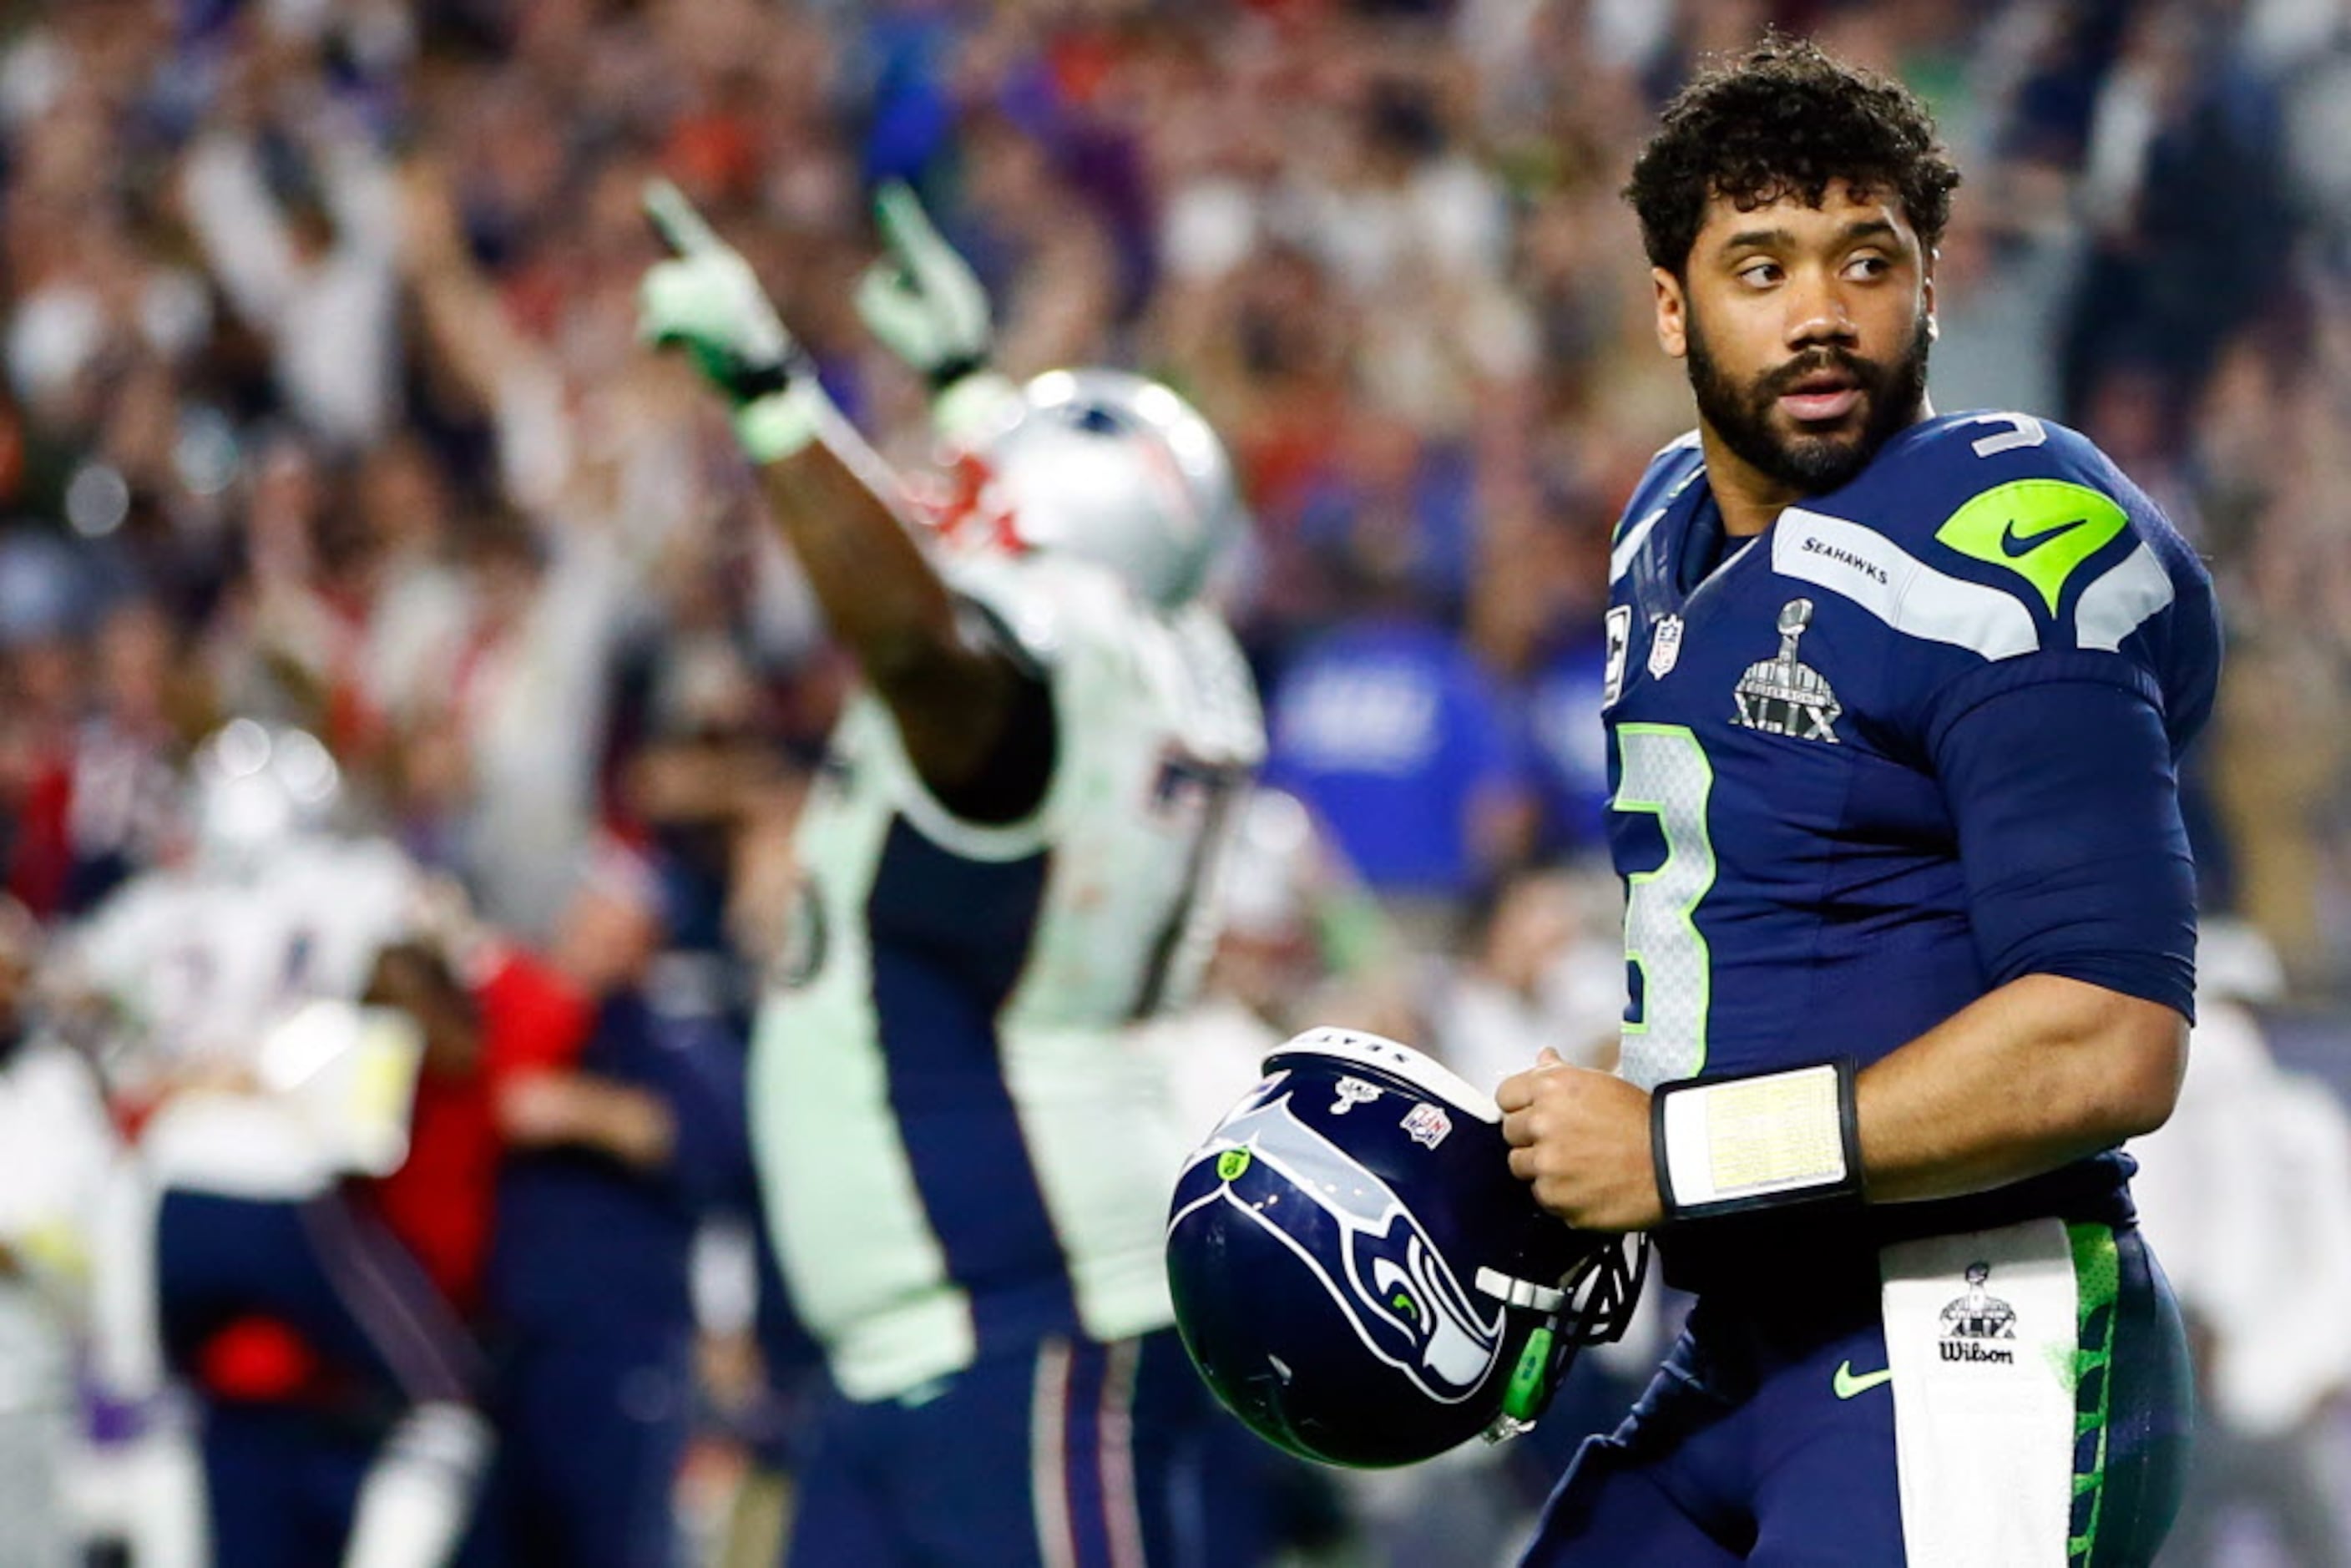 Russell Wilson Texas Rangers baseball jerseys go on sale a month after he  led the Seahawks to Super Bowl victory